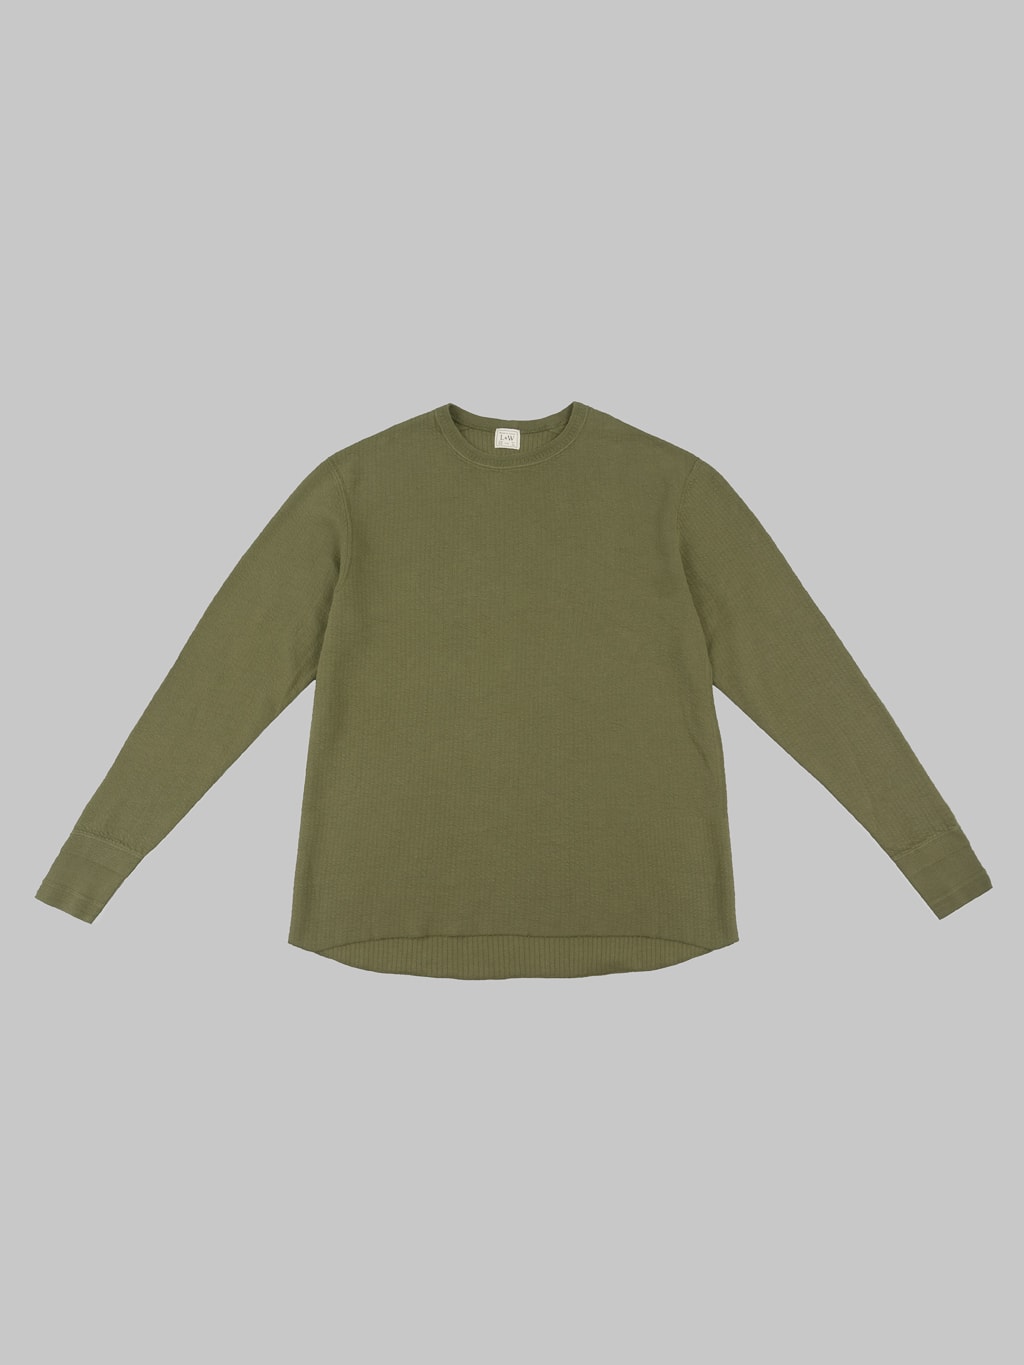 Loop Weft Double Face Jacquard crewneck Thermal army olive 100 cotton